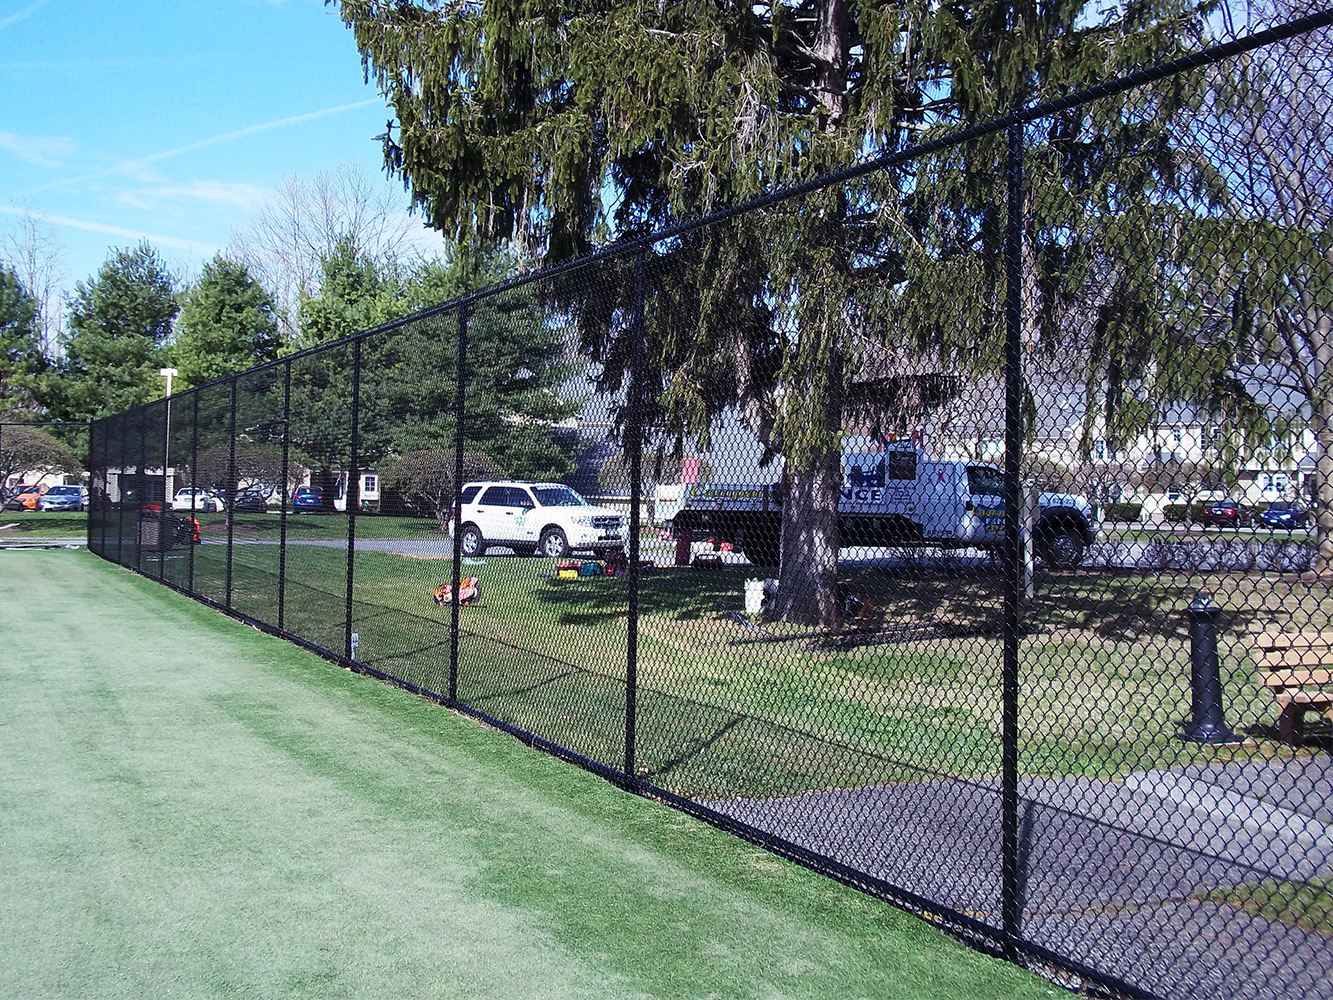 Photo of a chain link commercial fence from a fencing contractor in New York